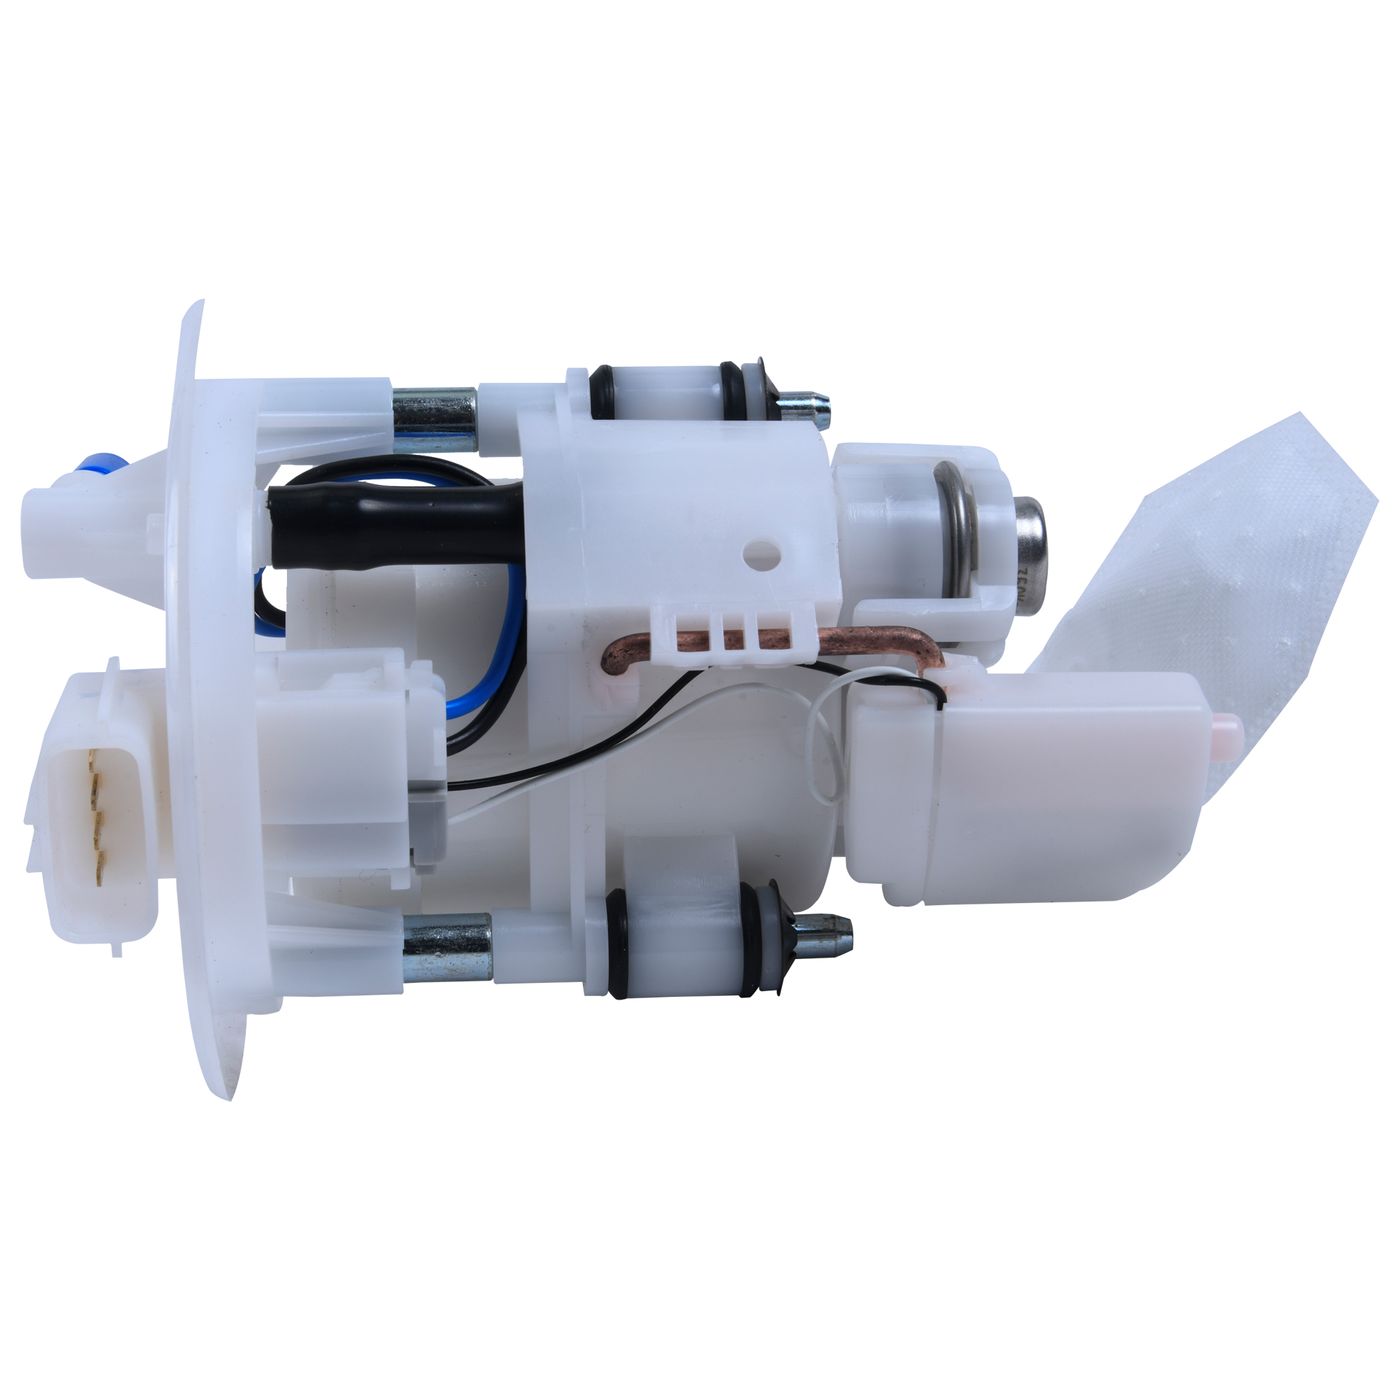 Wrp Fuel Pump Modules - WRP471035 image